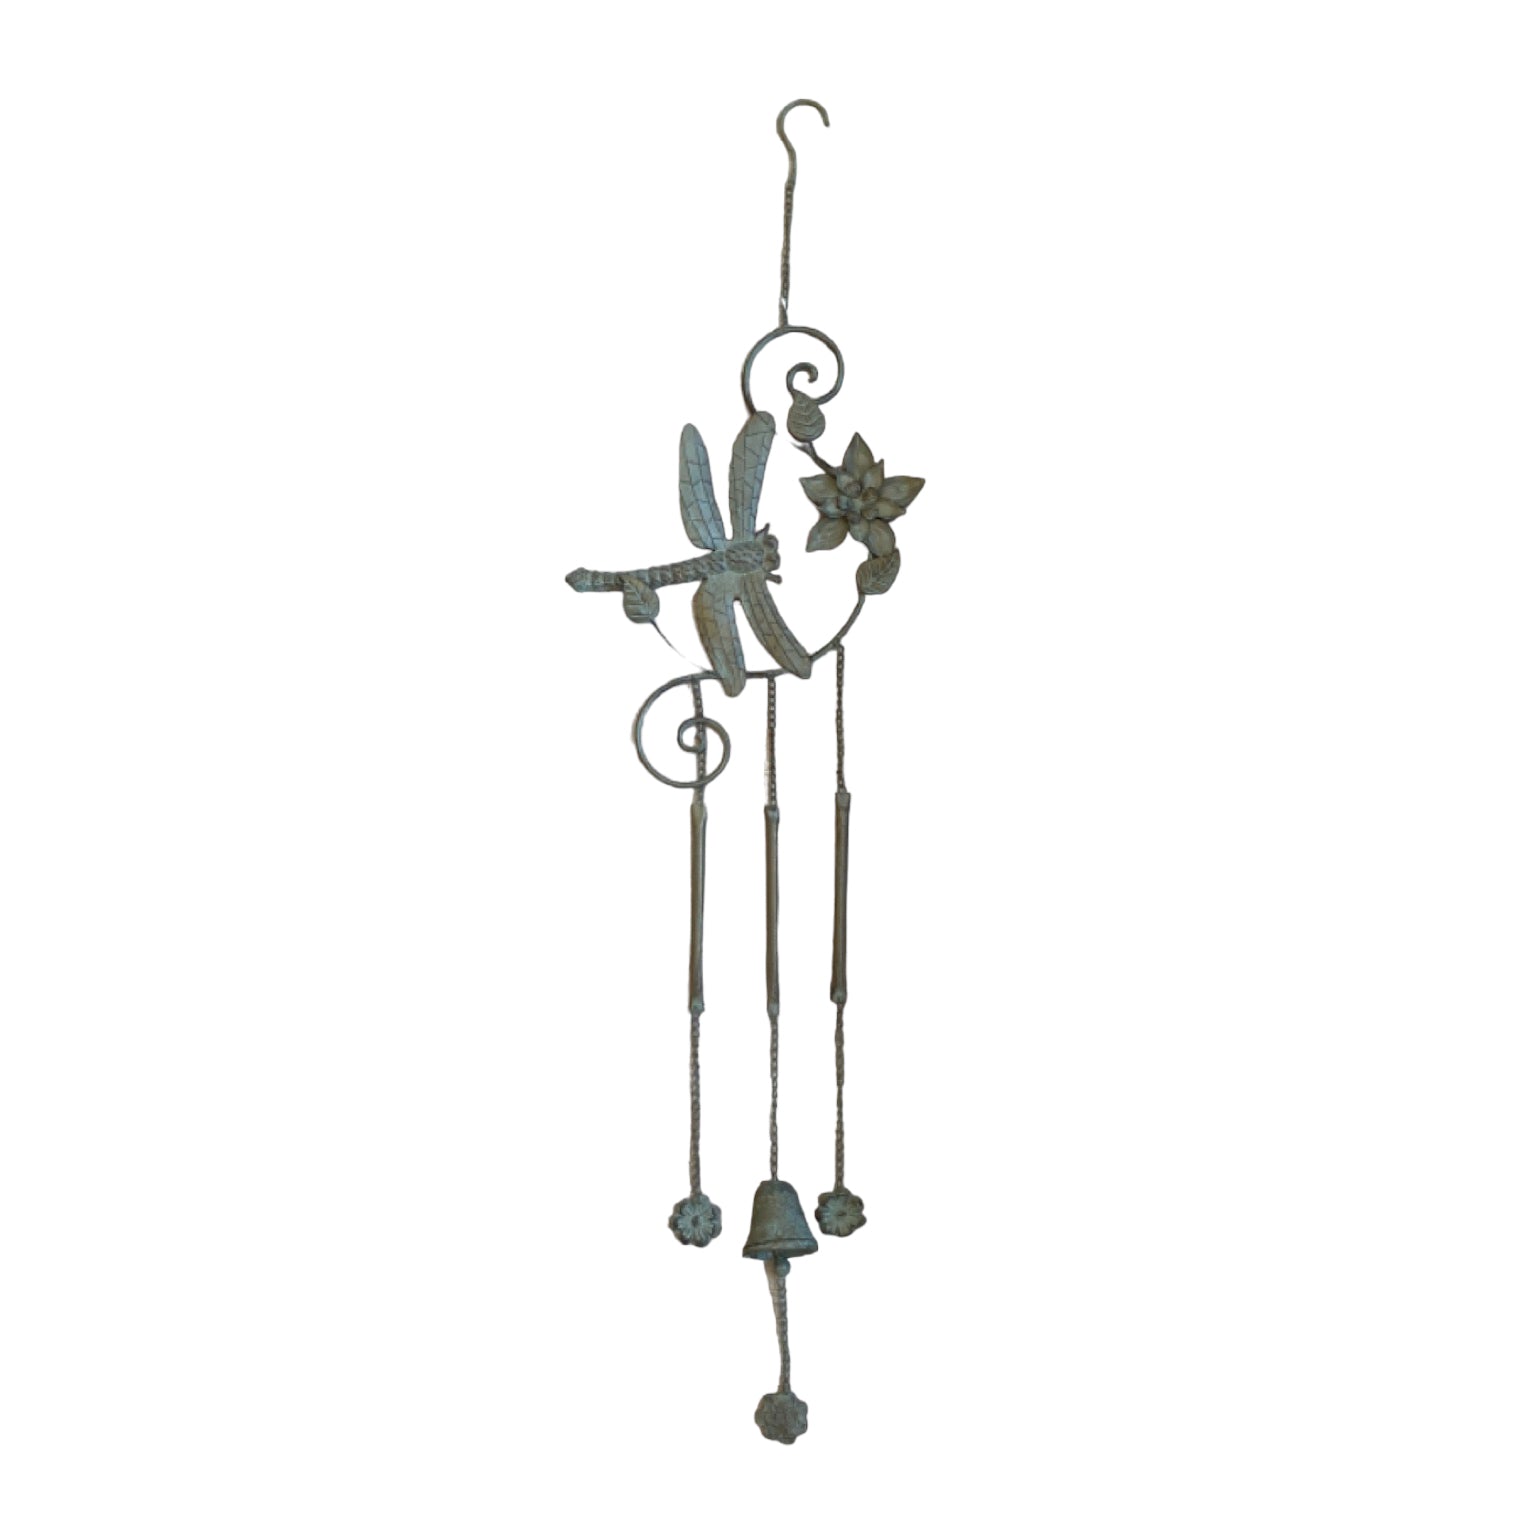 Wind Chime Windchime Dragonfly Antique Garden - The Renmy Store Homewares & Gifts 